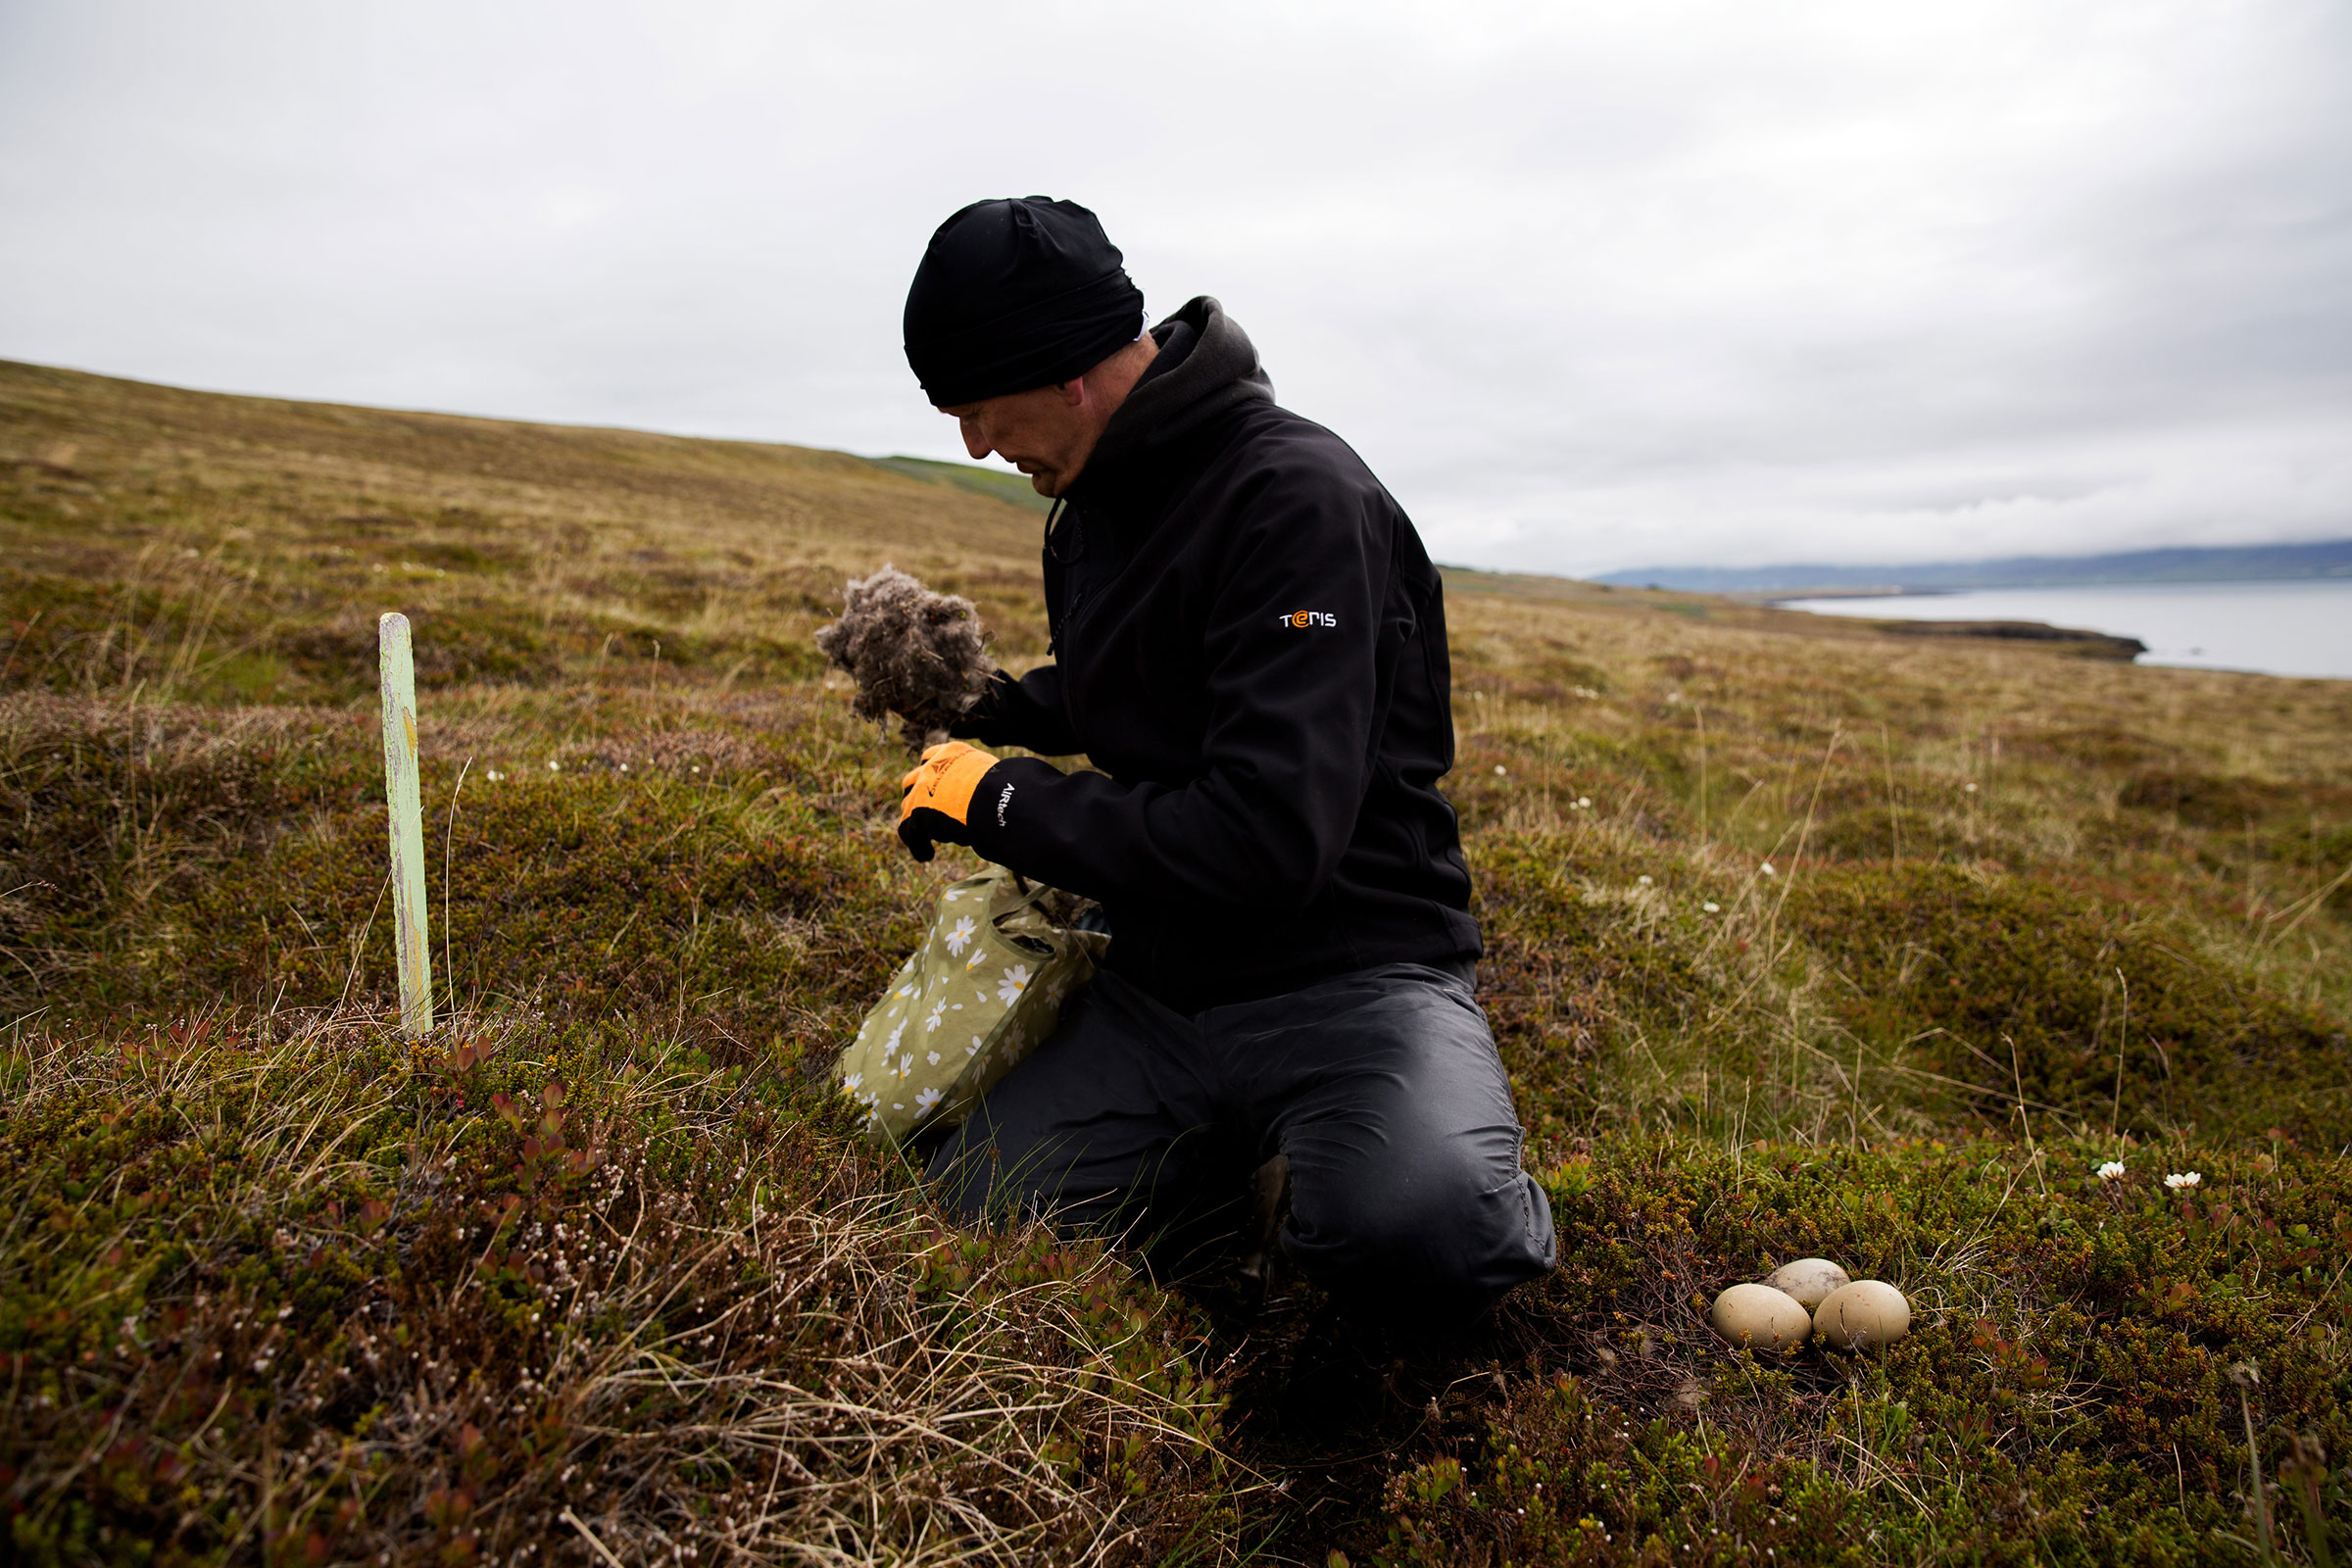 Documenting a tradition and local way of life in Hrisey, Iceland. Farmers harvest eider down by collecting every used nest and gather it for resale.